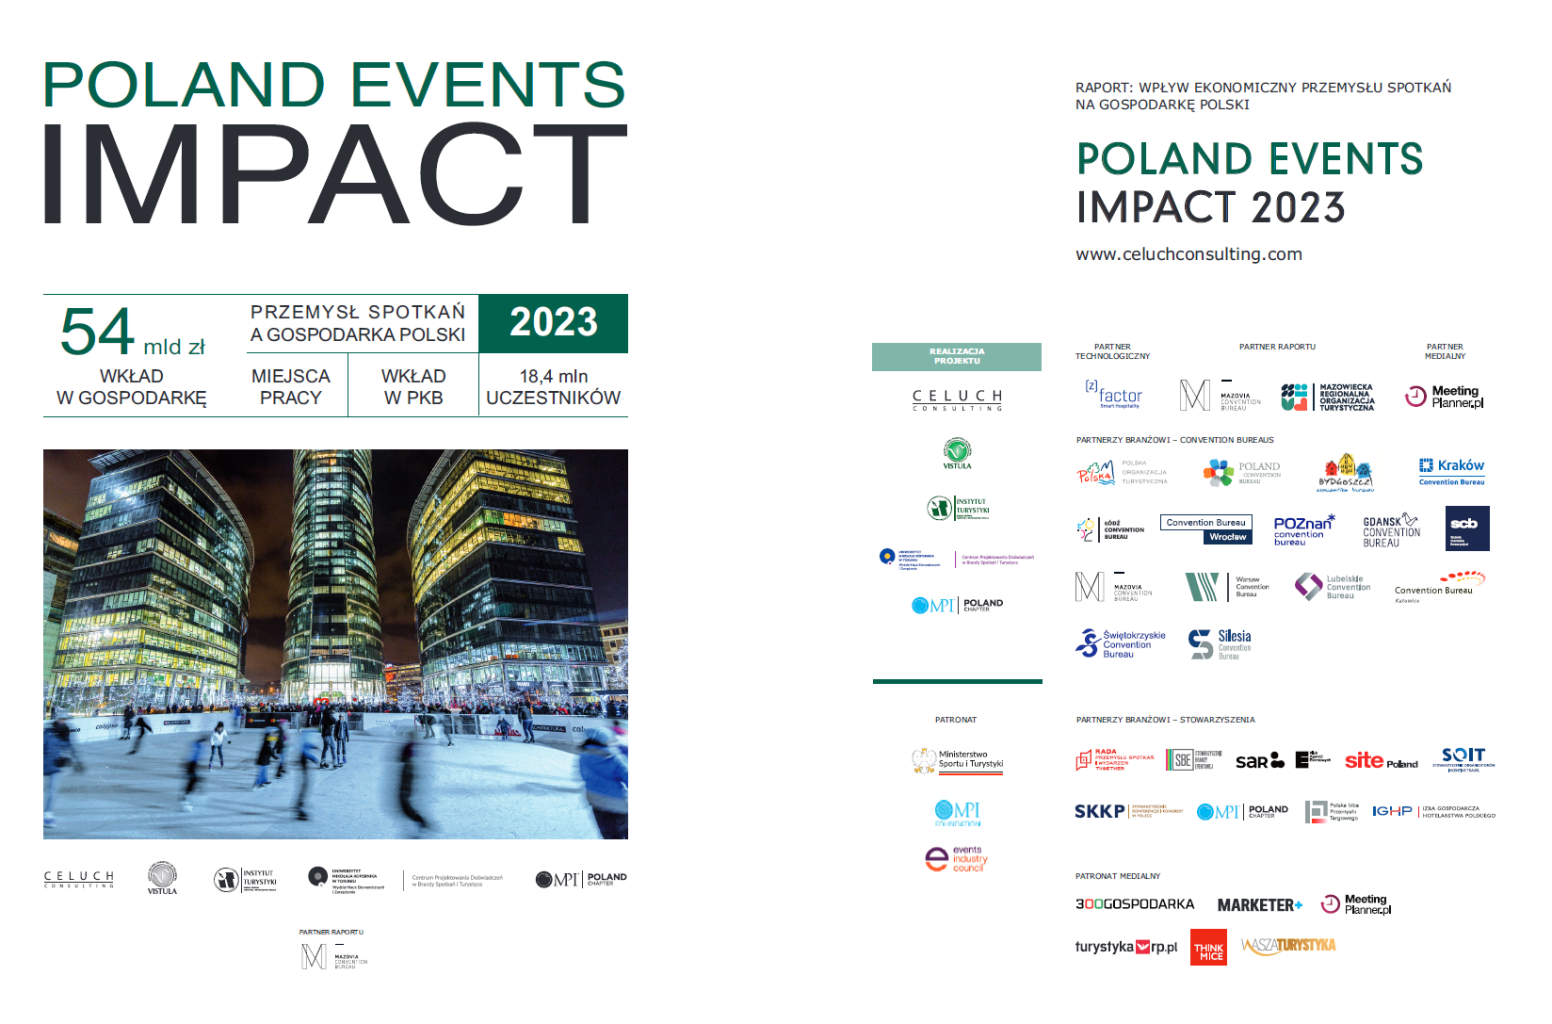 Poland Events Impact MICE industry report